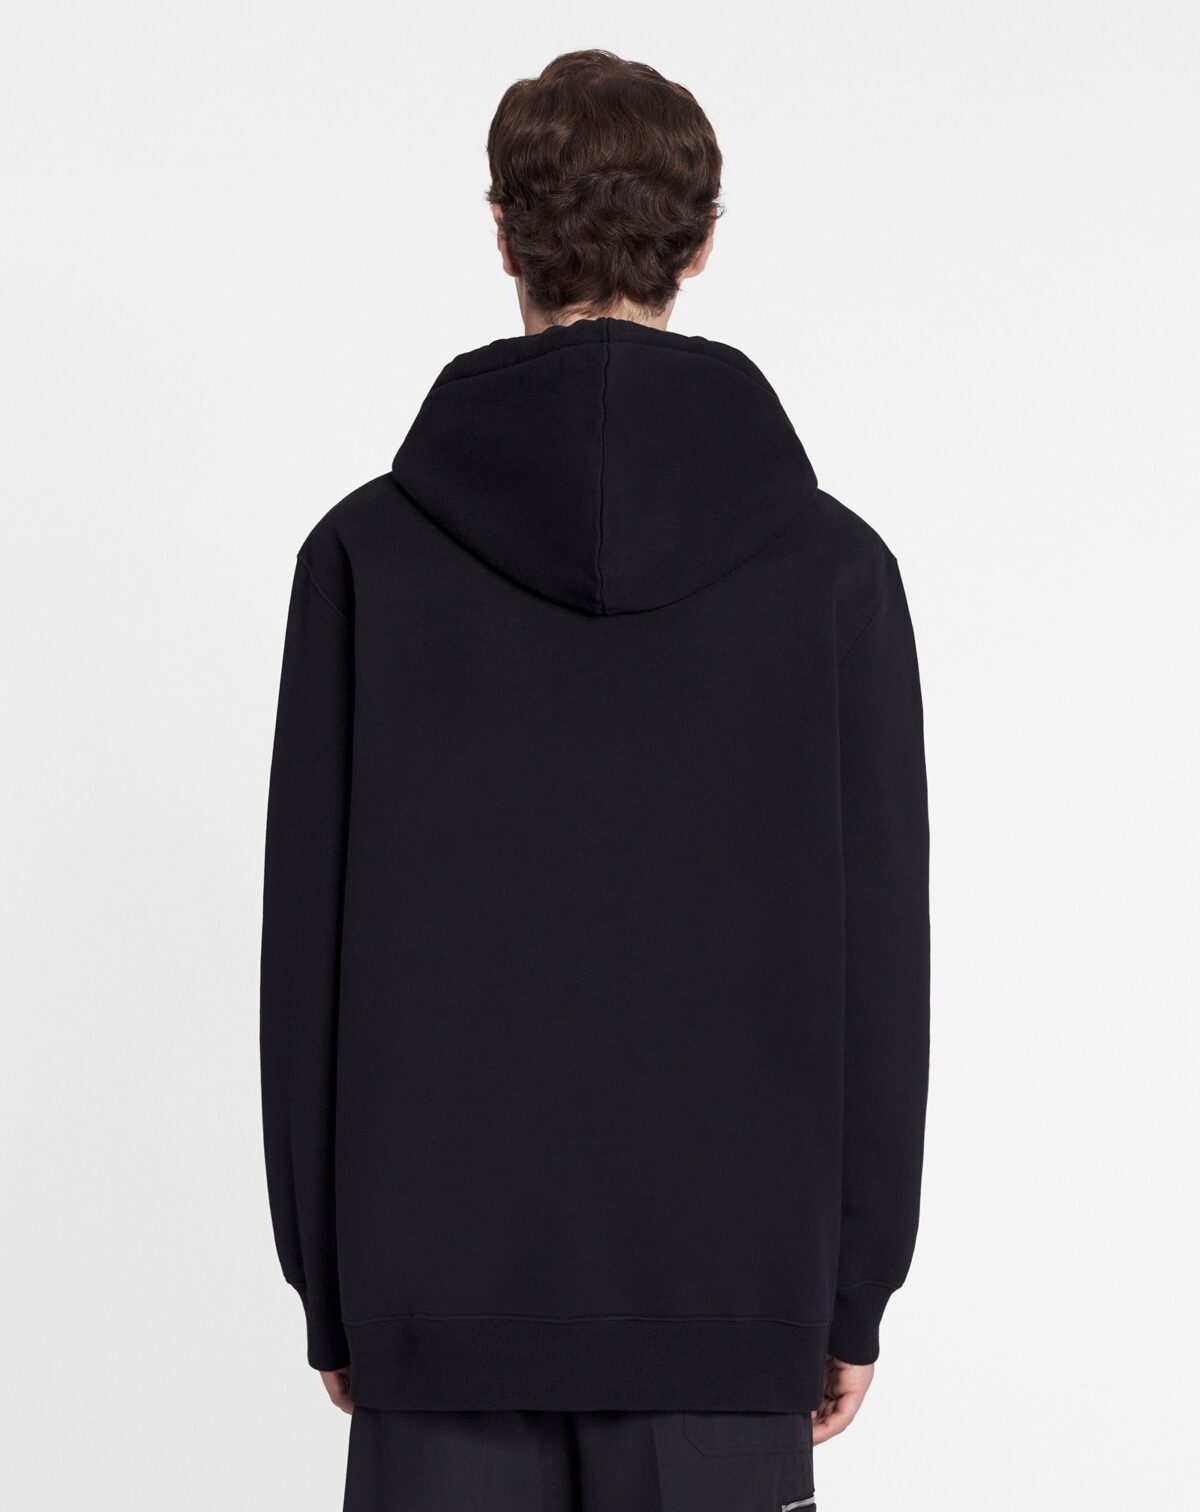 UNISEX LOOSE-FITTING HOODIE WITH LANVIN